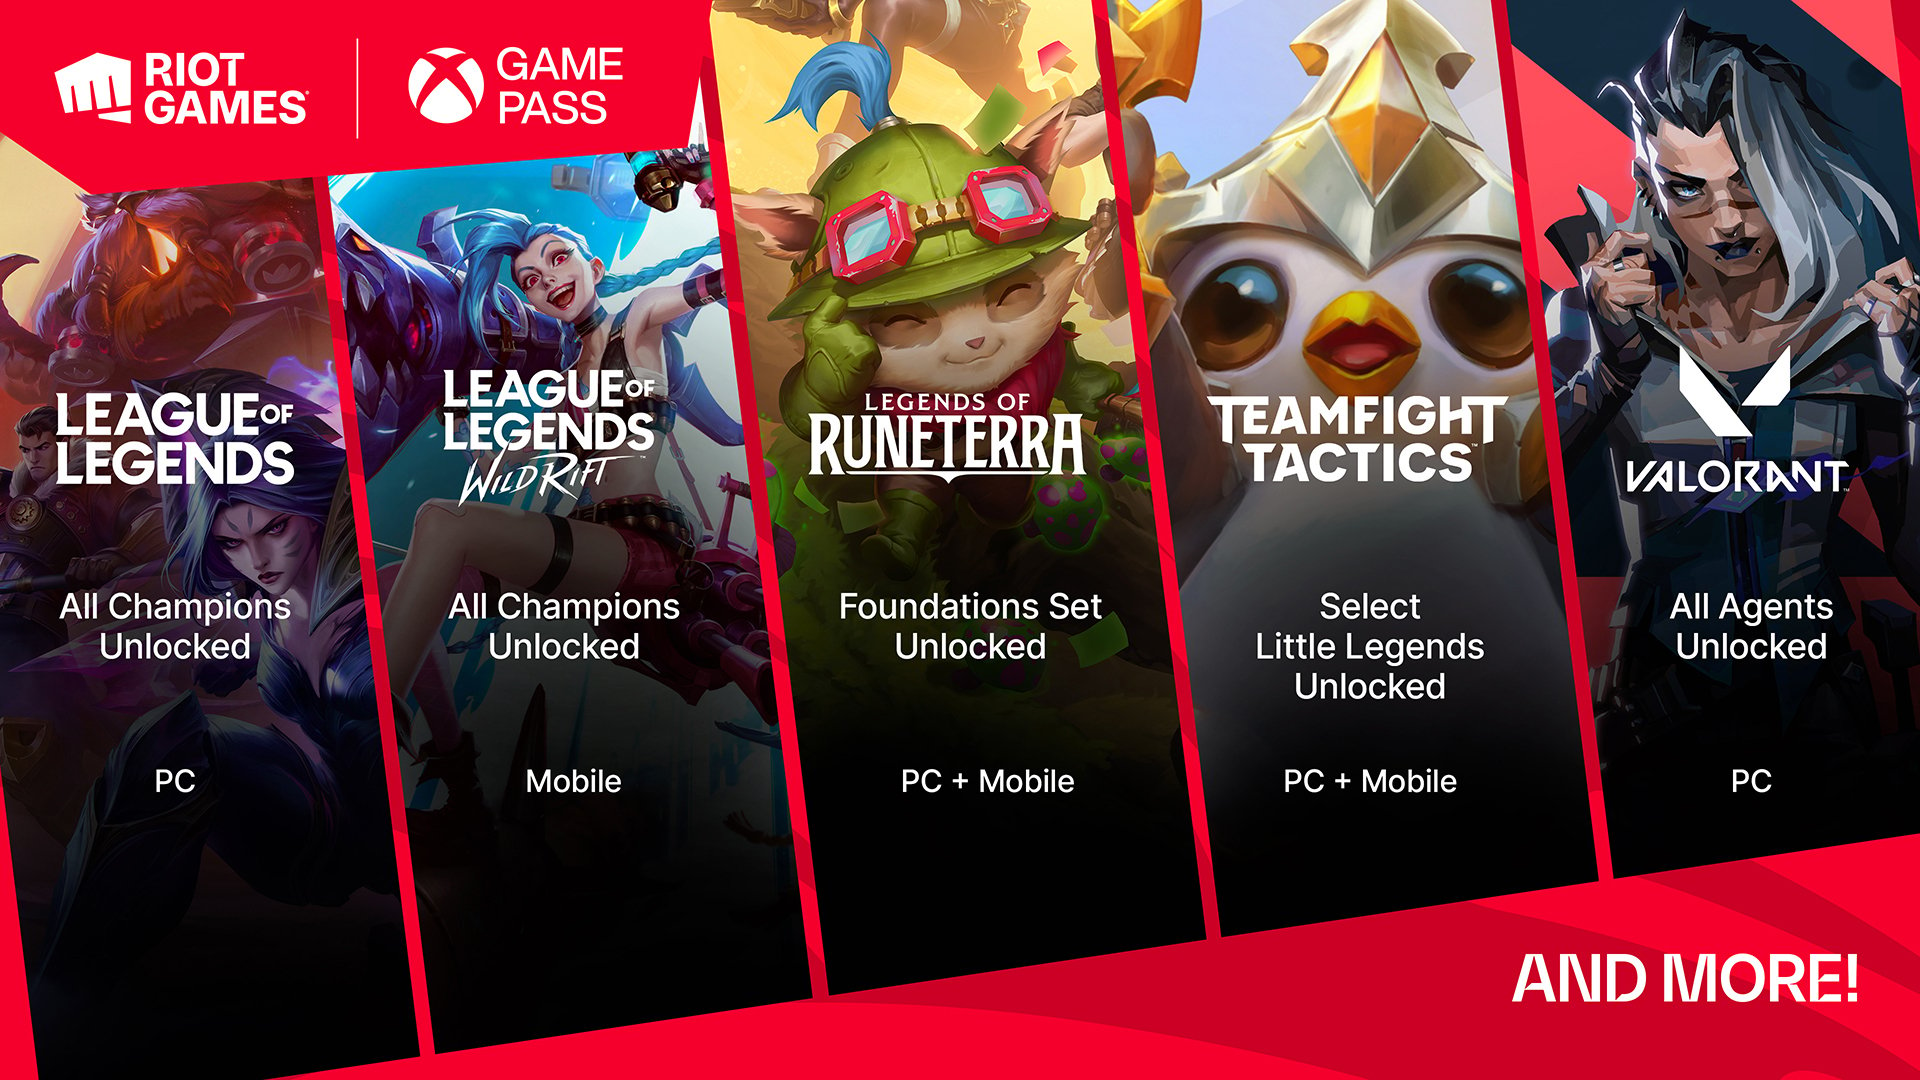 ‘League of Legends: Wild Rift’, ‘Legends of Runeterra’ and ‘Teamfight Tactics’ Perks on Mobile and PC Coming to Xbox Game Pass Subscribers This Year